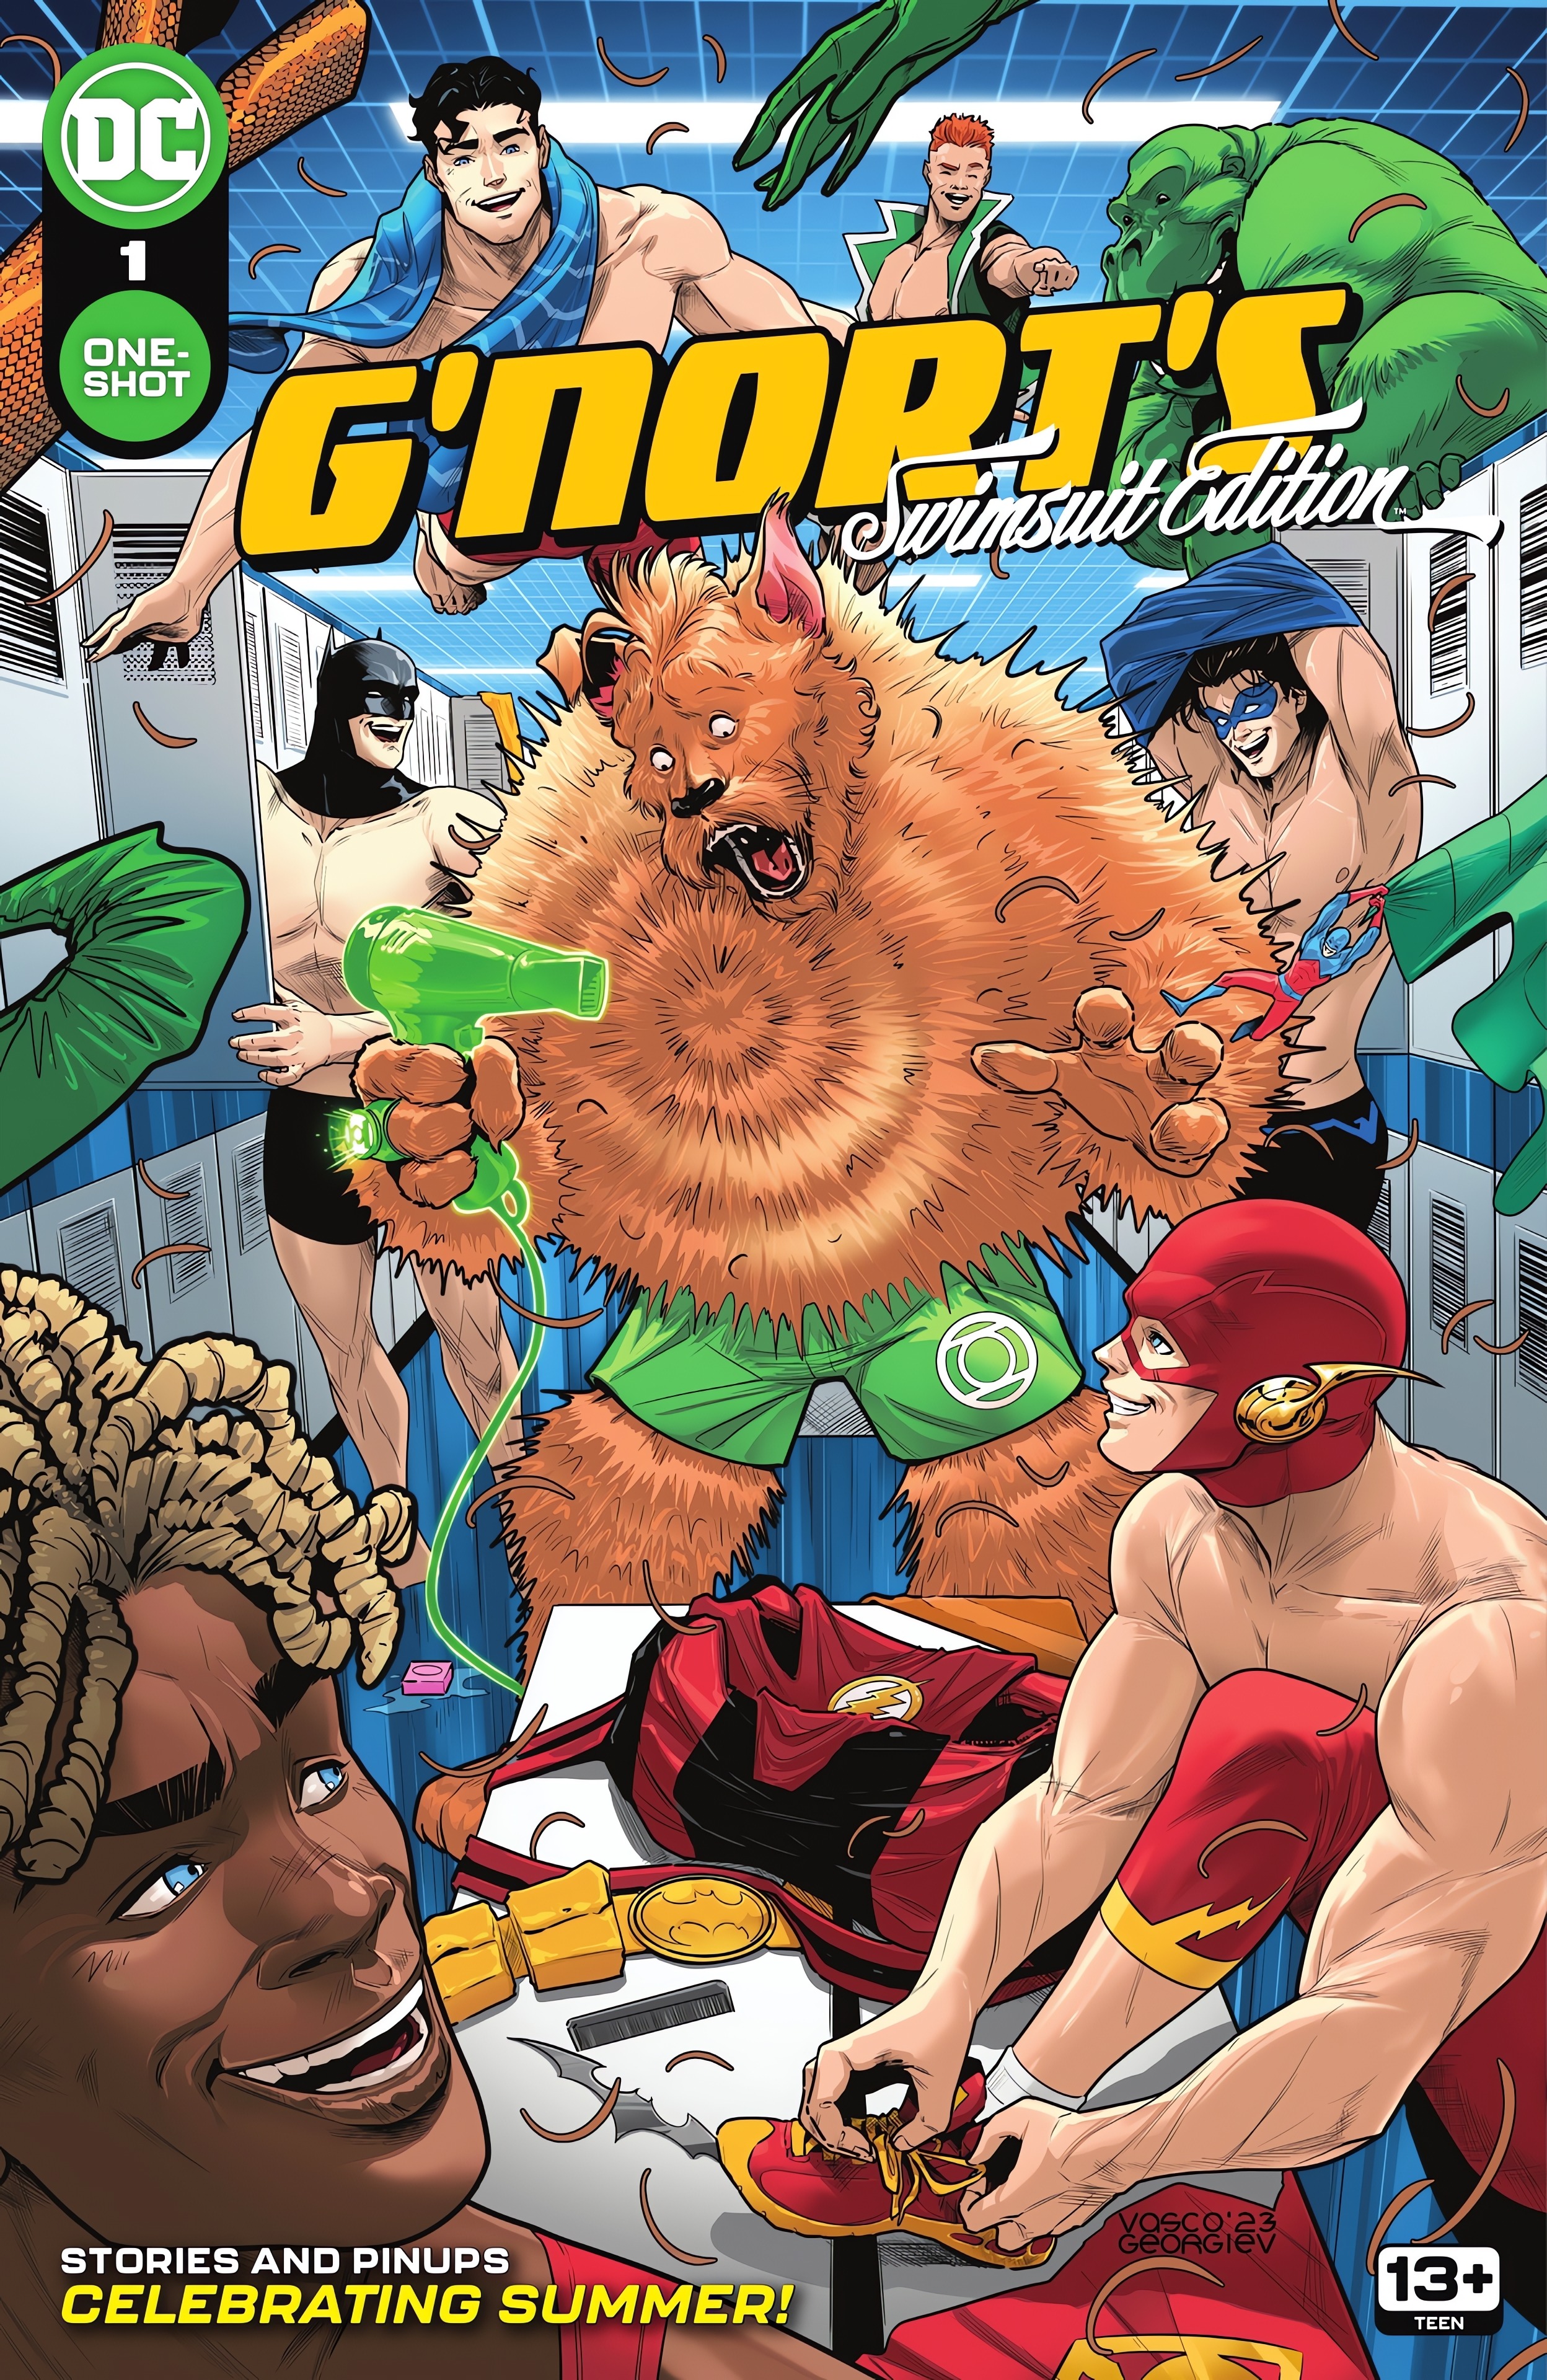 Read online G'nort's Swimsuit Edition comic -  Issue # Full - 1